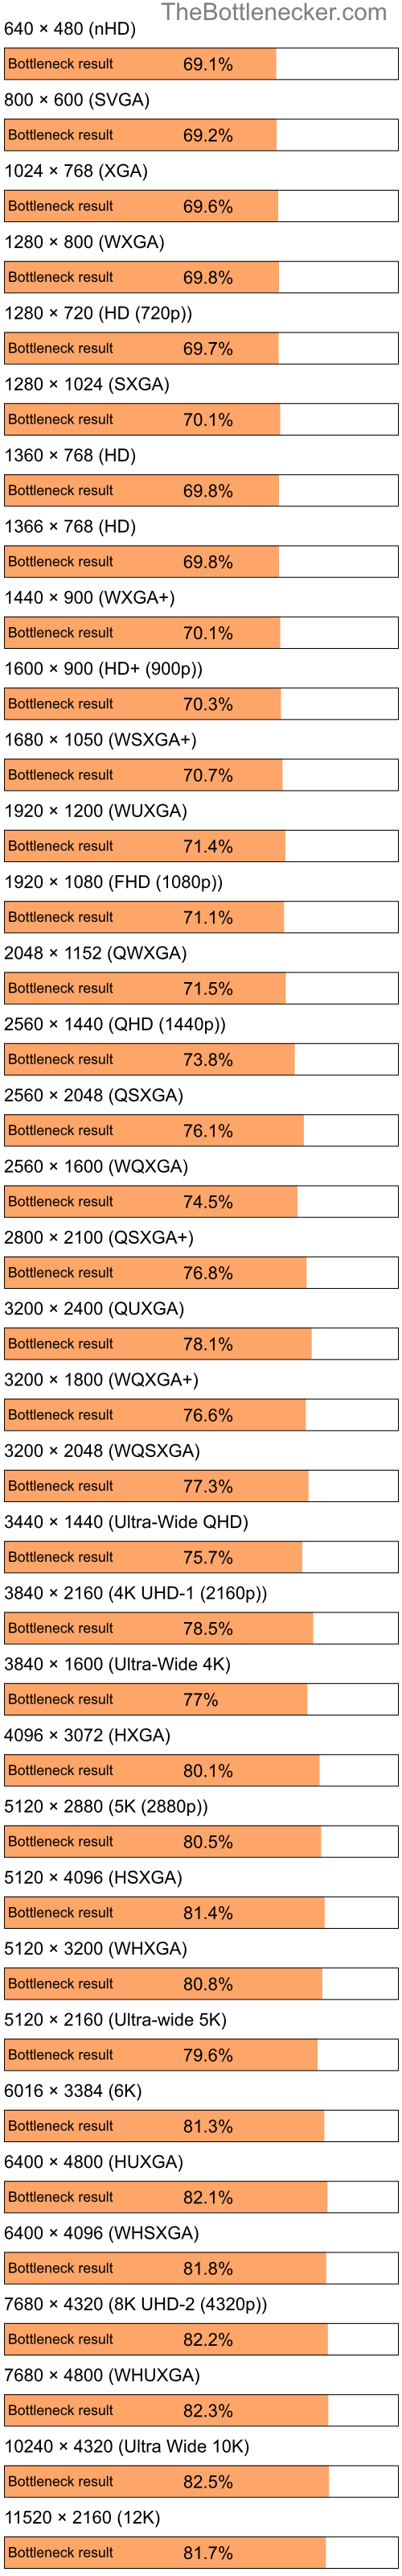 Bottleneck results by resolution for Intel Atom Z520 and NVIDIA Quadro NVS 140M in7 Days to Die